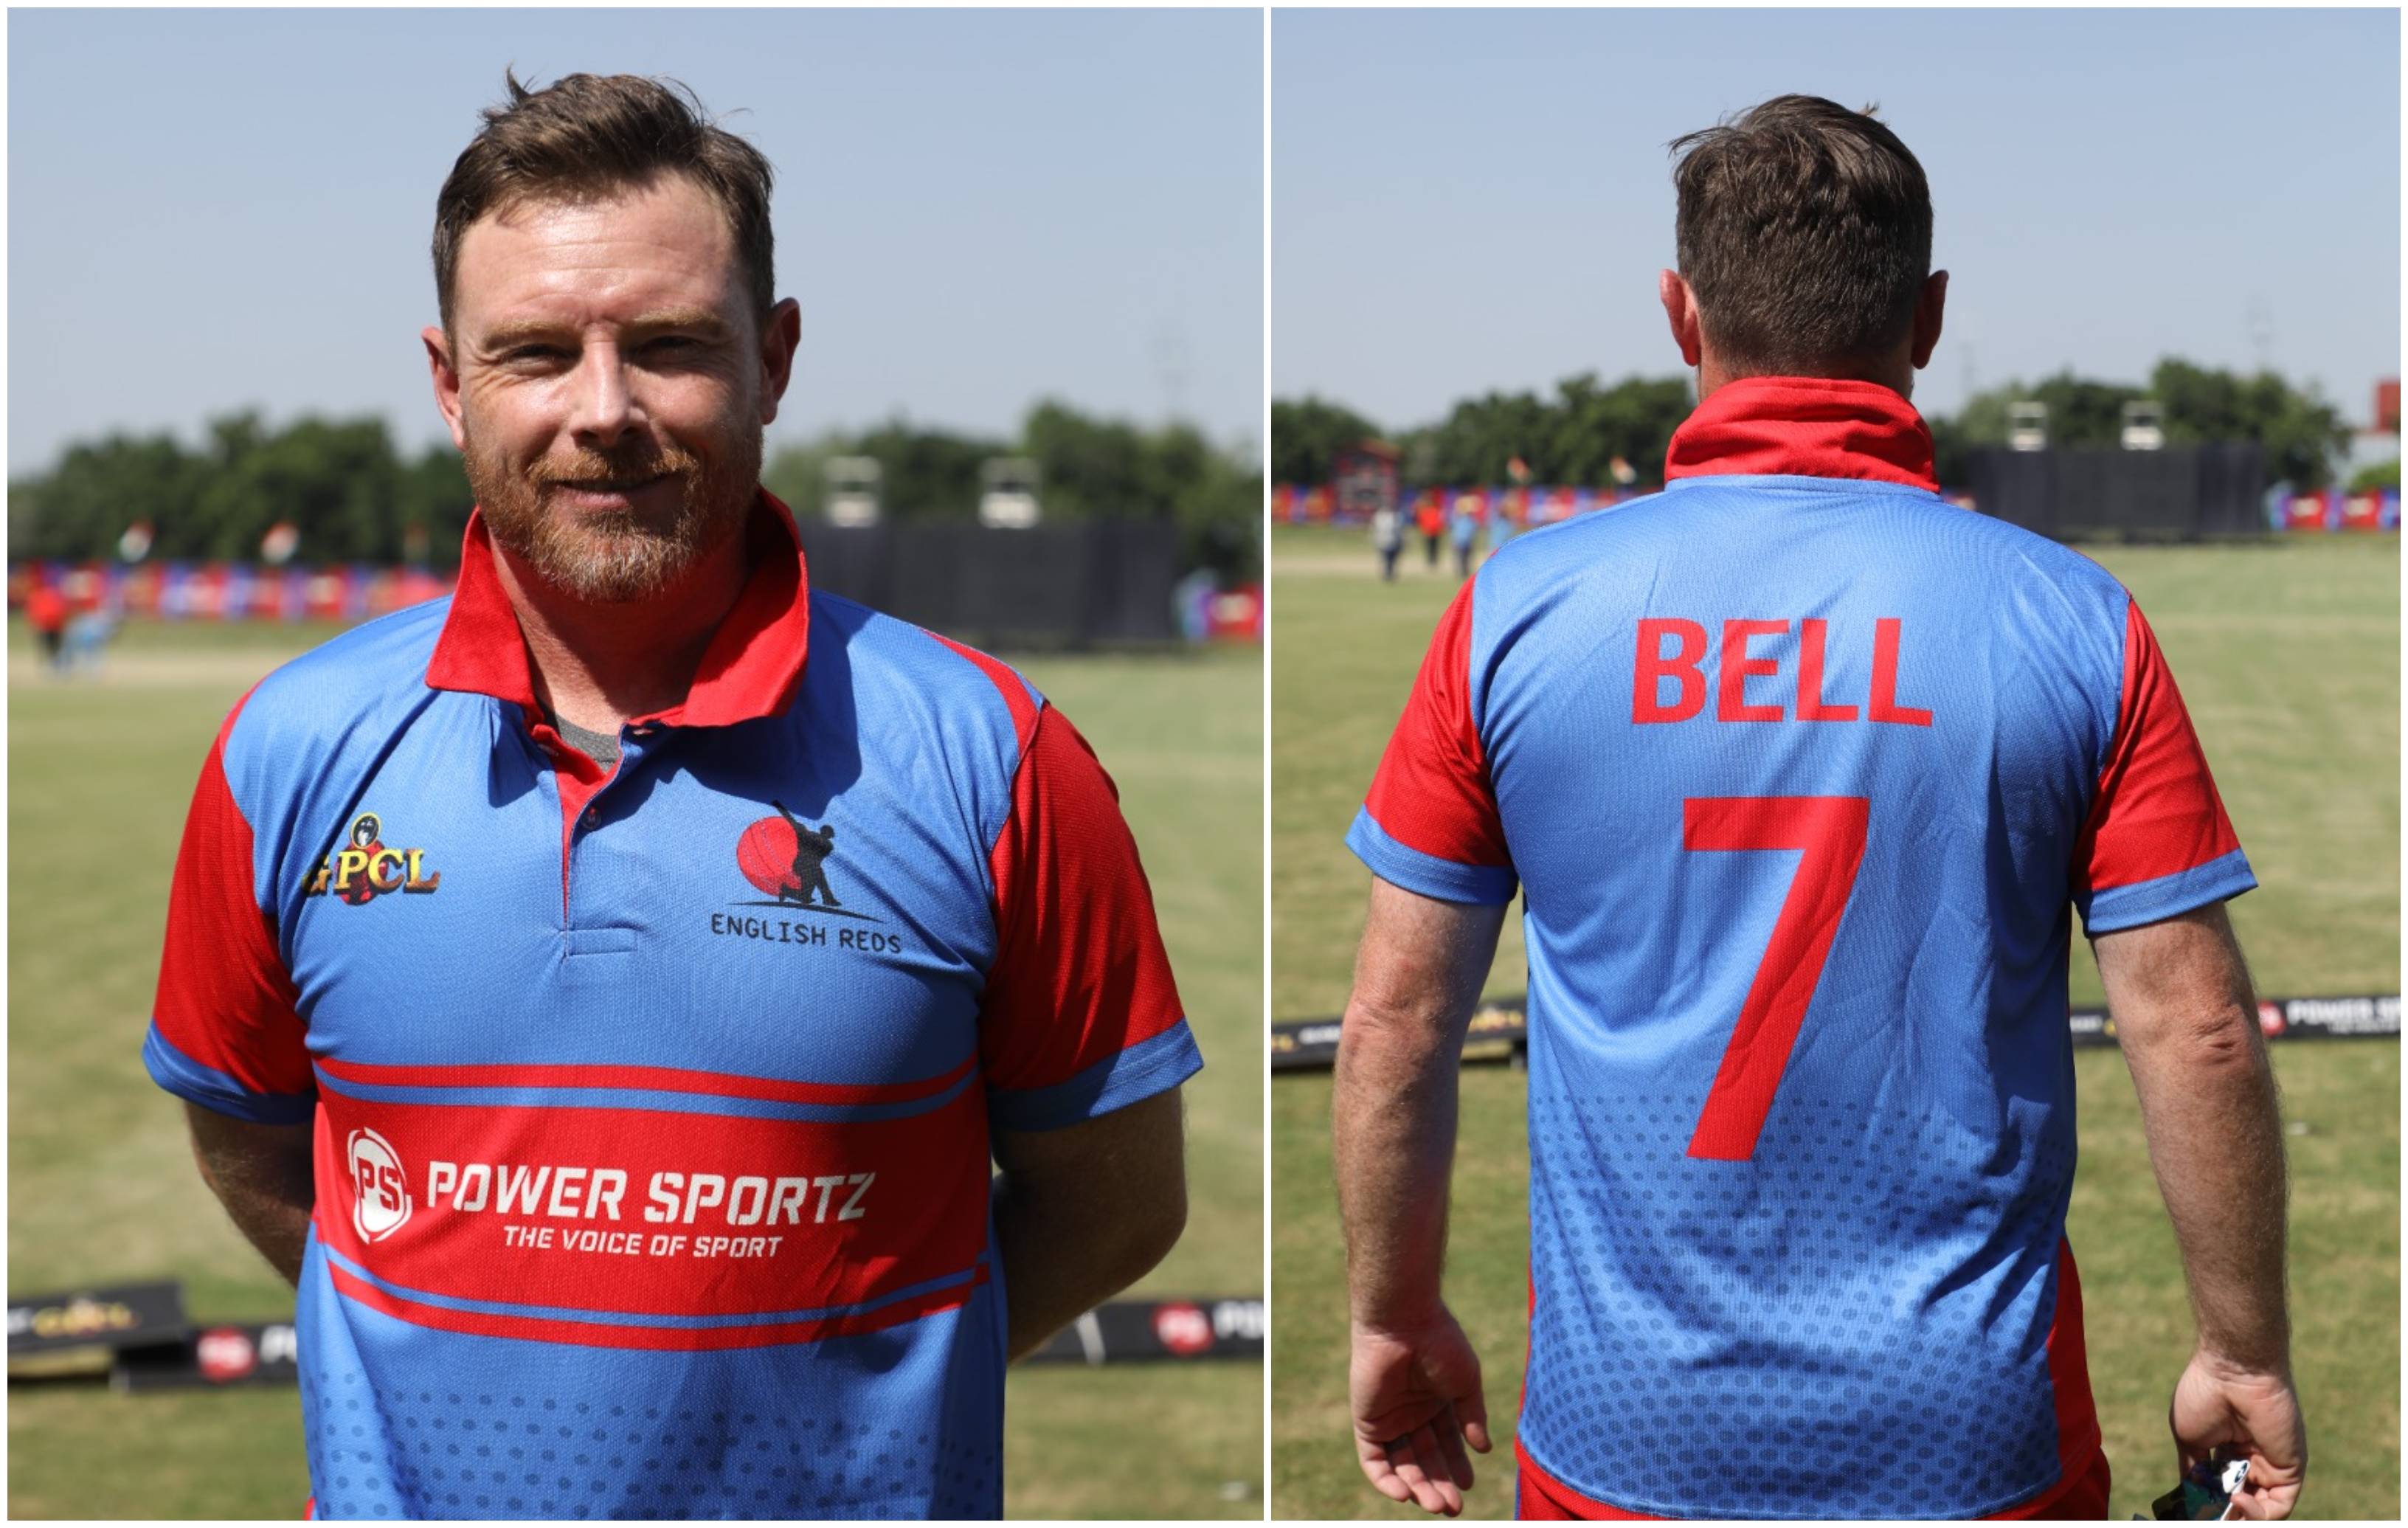 Ian Bell is leading English Reds | GPCL